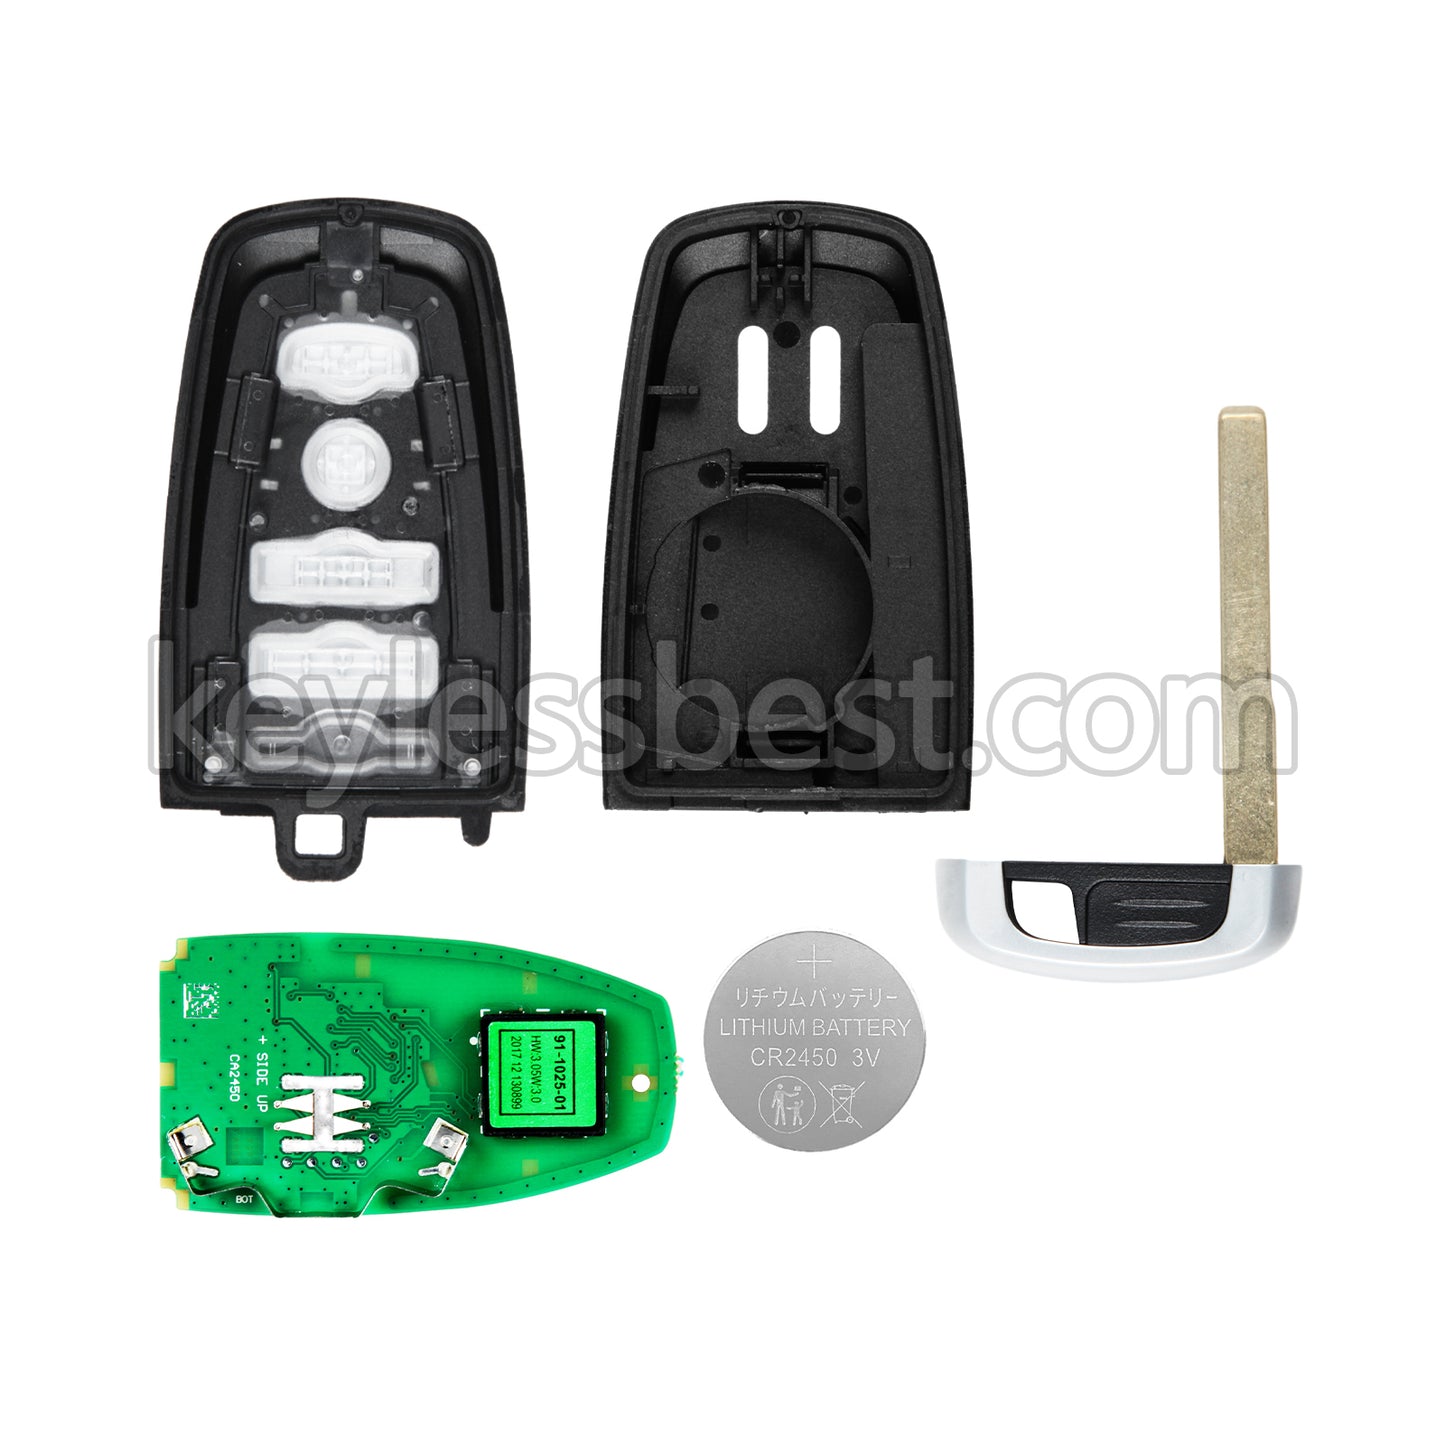 2019 Ford Transit Connect / 4 Buttons Remote Key / M3N-A2C931423 / 315MHz